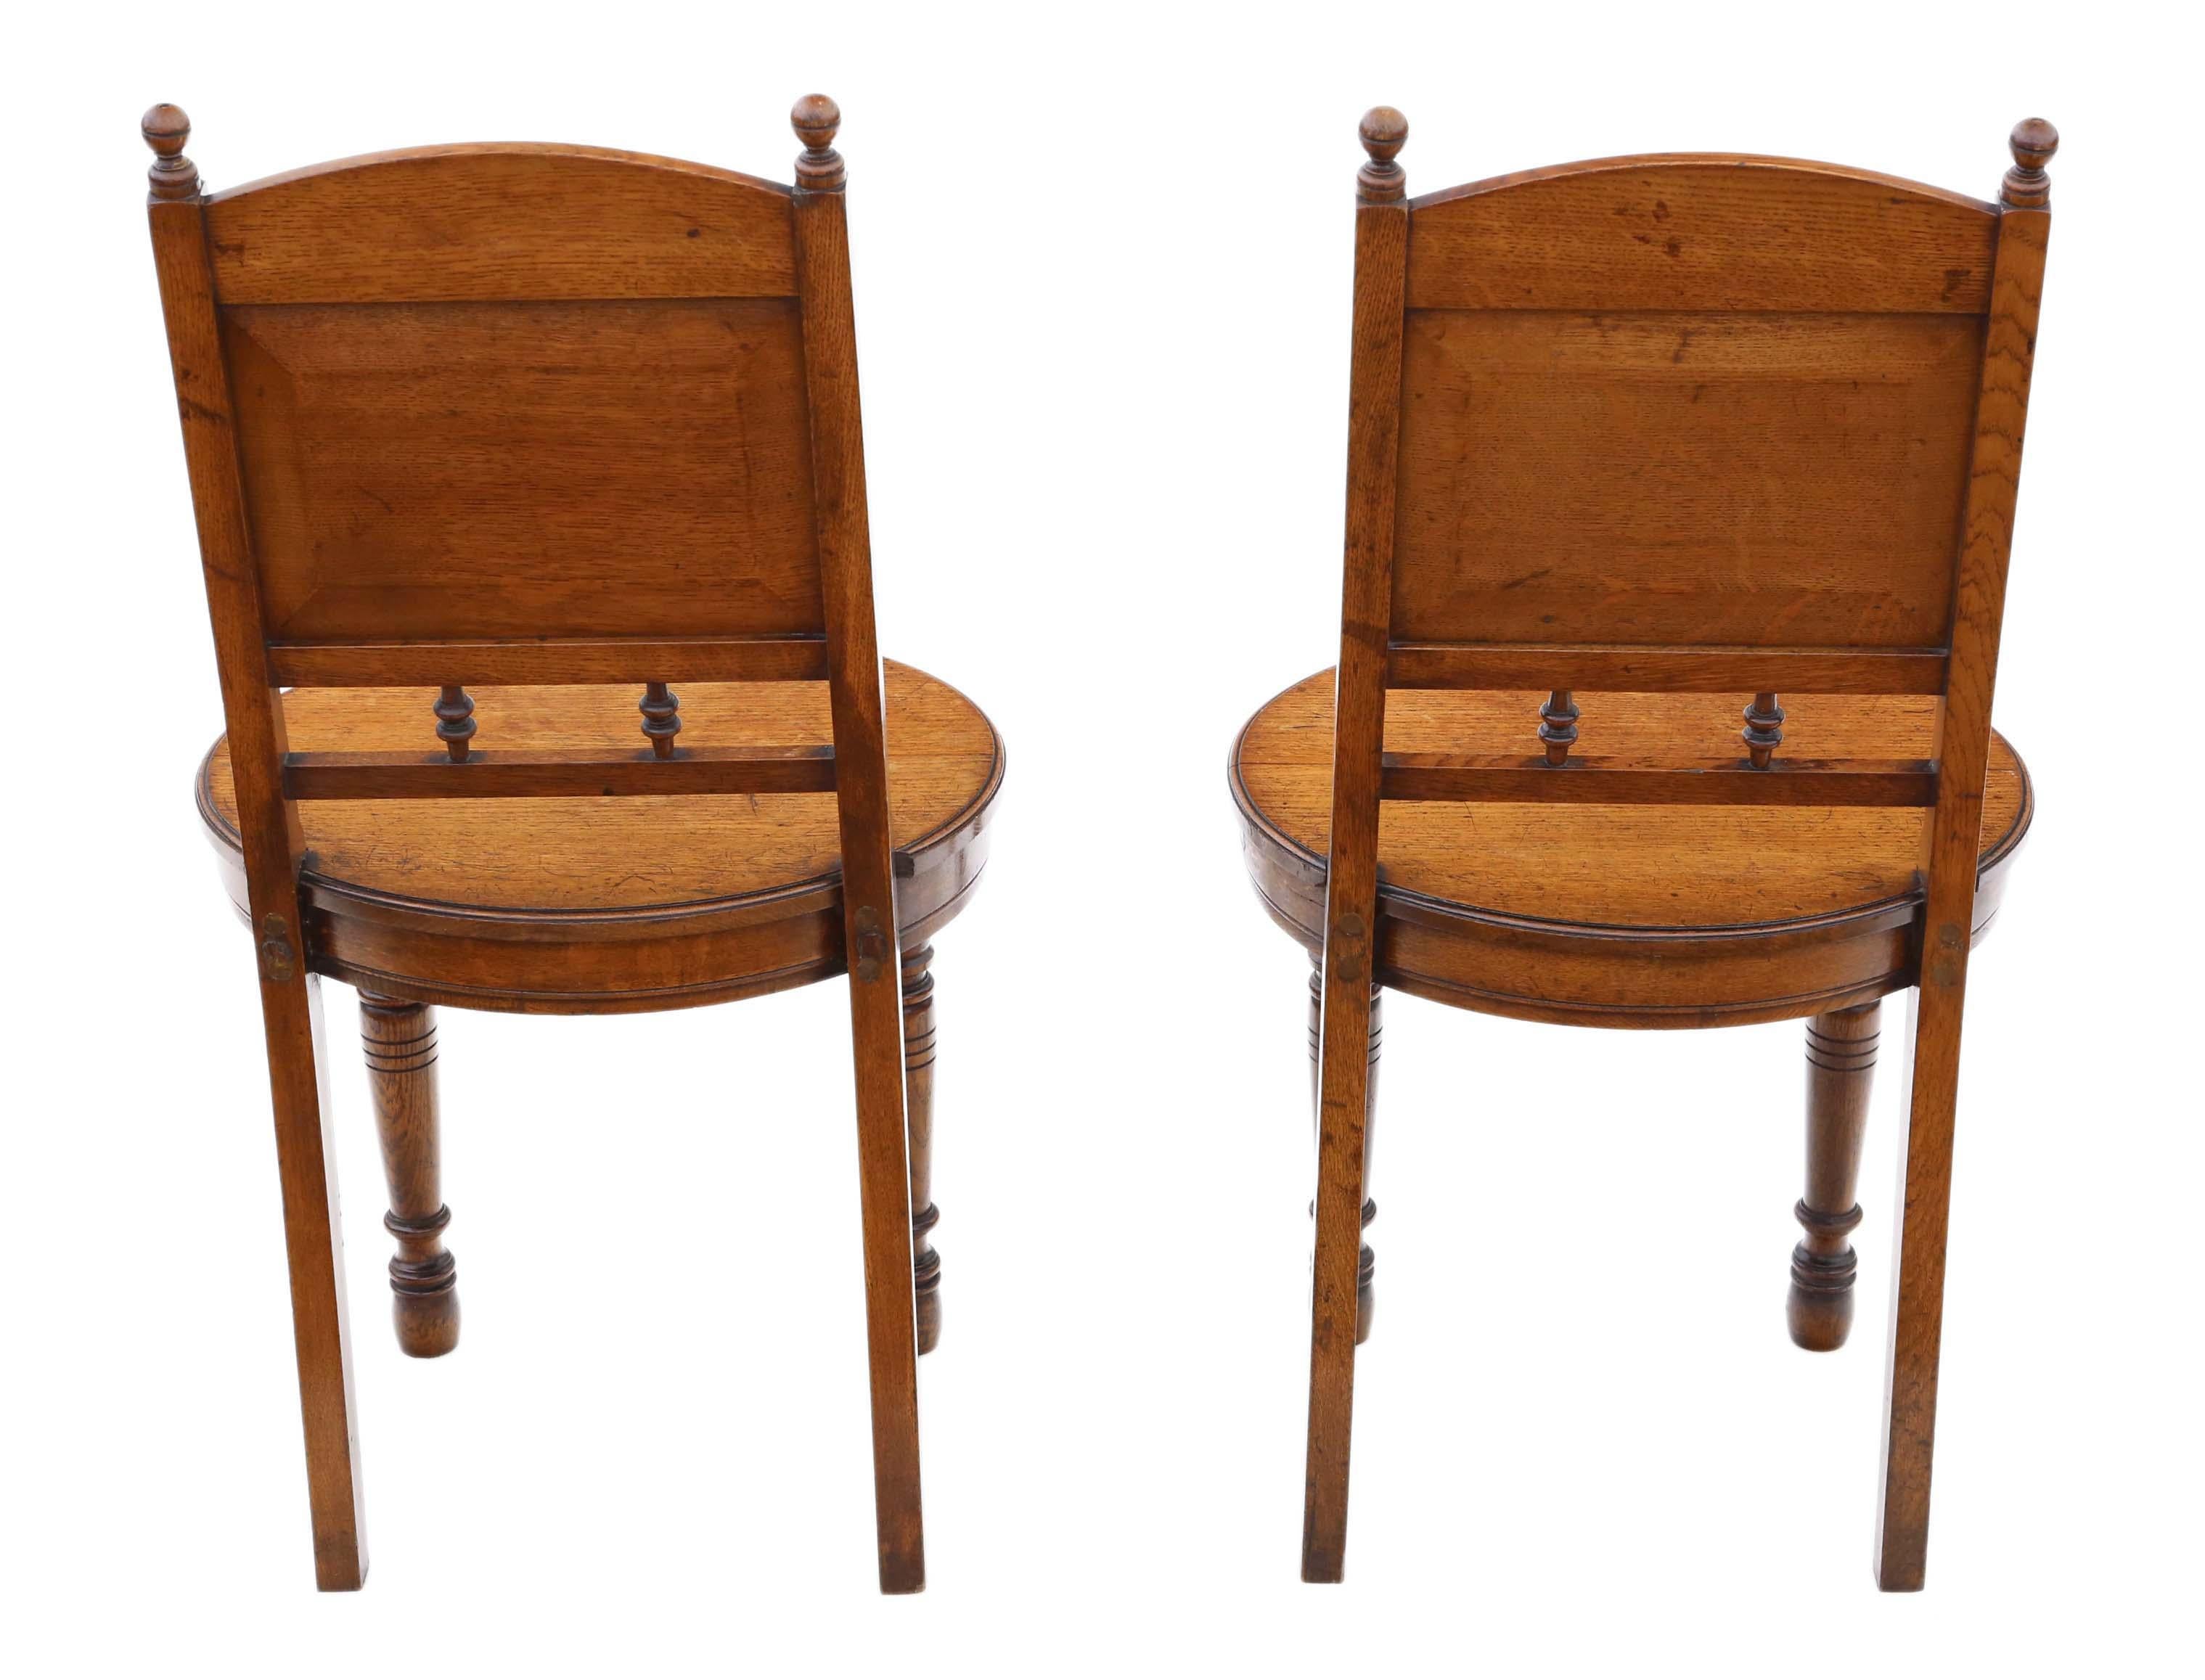 Antique quality pair of oak, hall, side or bedroom chairs C1880, 19th century. Simple rare design.

Solid and heavy with no loose joints and no woodworm. Full of age, character and charm.

Would look great in the right location!

Overall